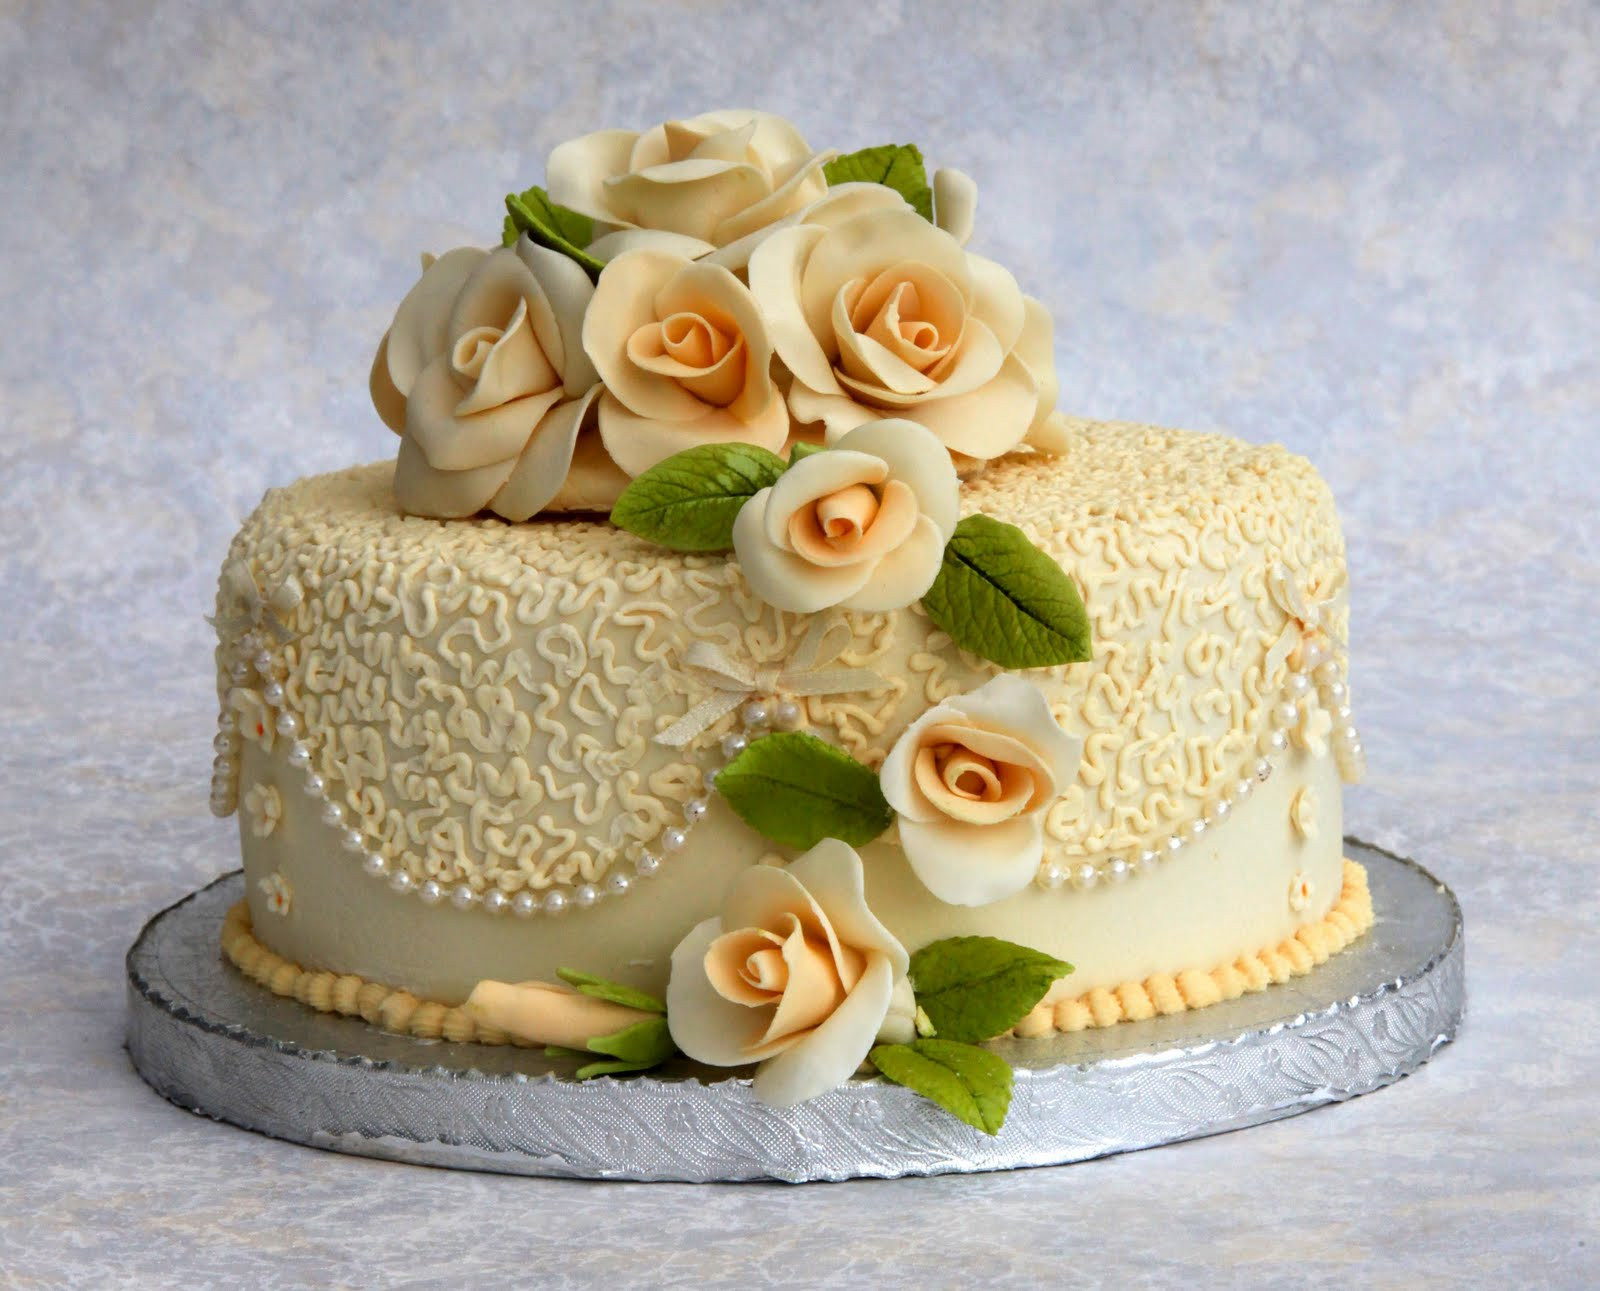 Gorgeous Birthday Cakes
 25 Most Beautiful Cake Selections Page 4 of 25